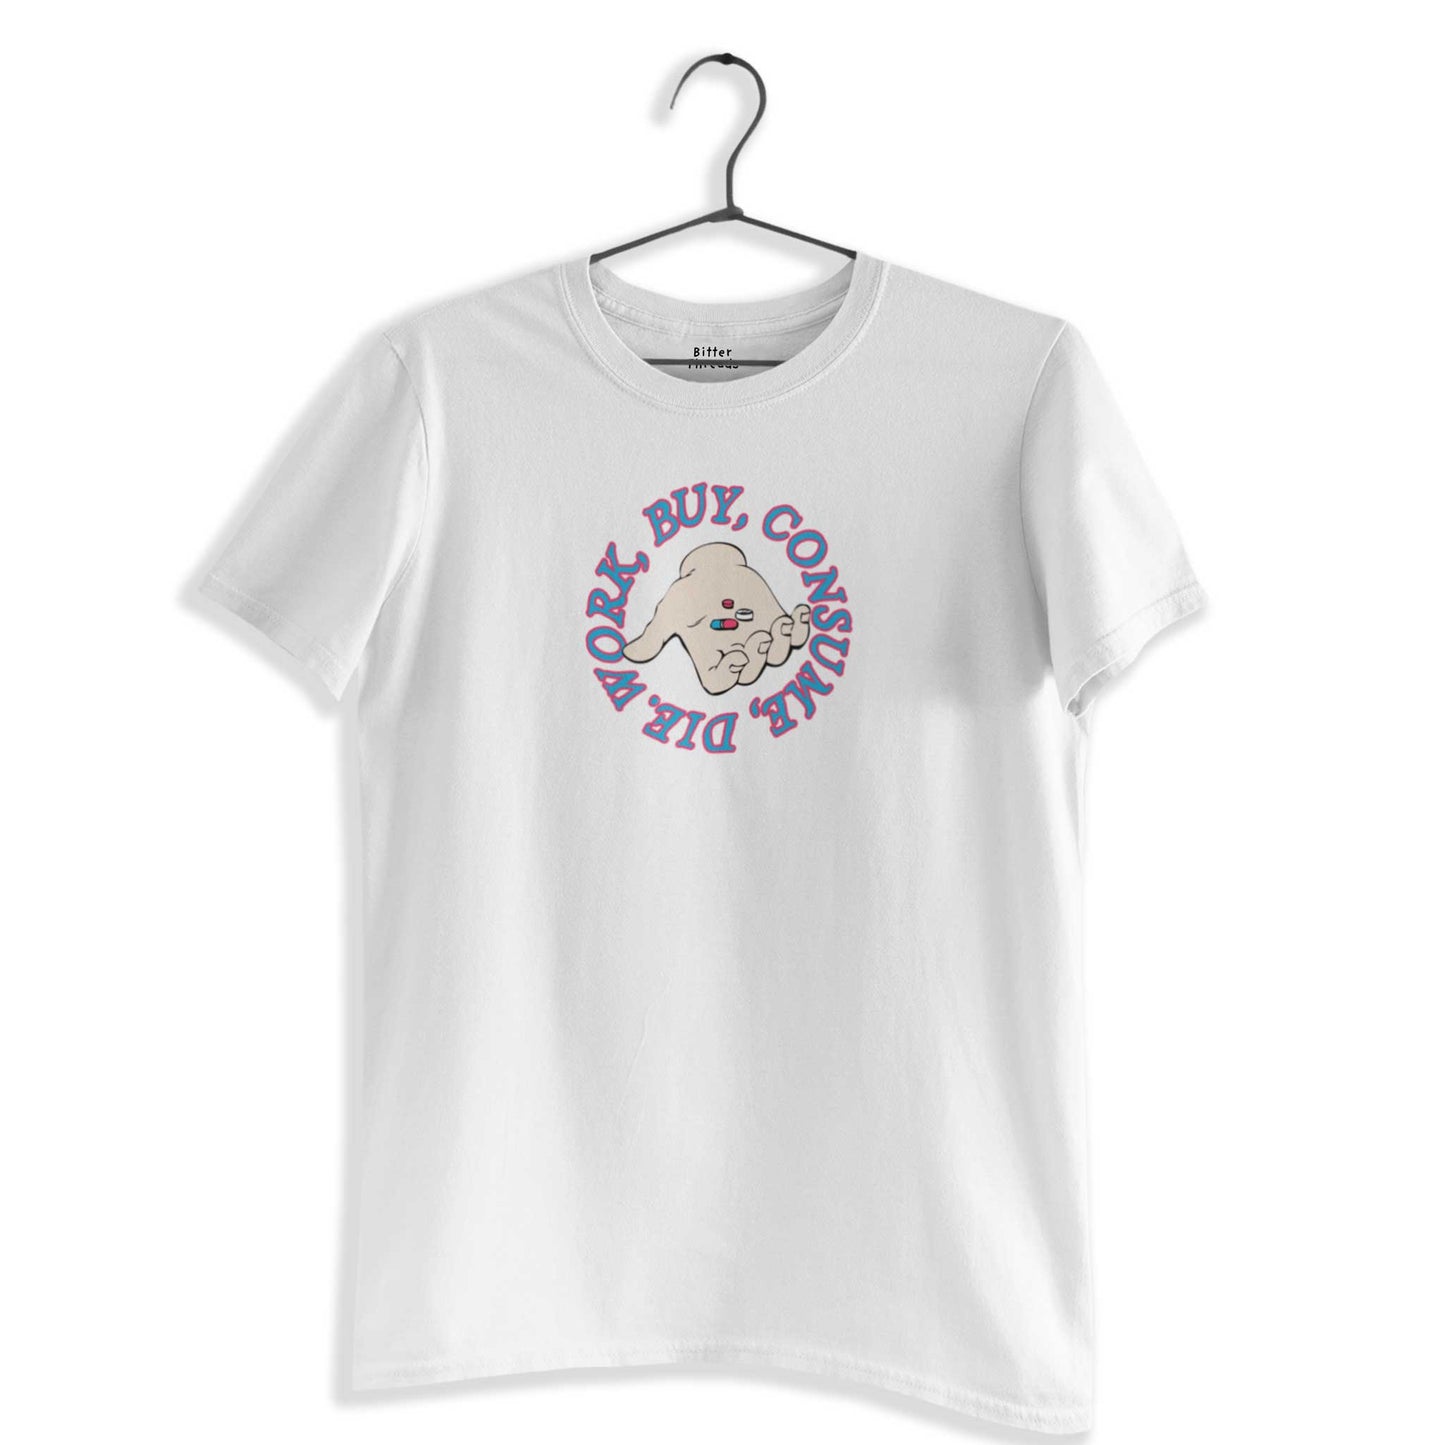 Work, Buy, Consume, Die. Unisex Organic Cotton T-shirt Made In The USA-T-Shirts-White-S-Hagsters